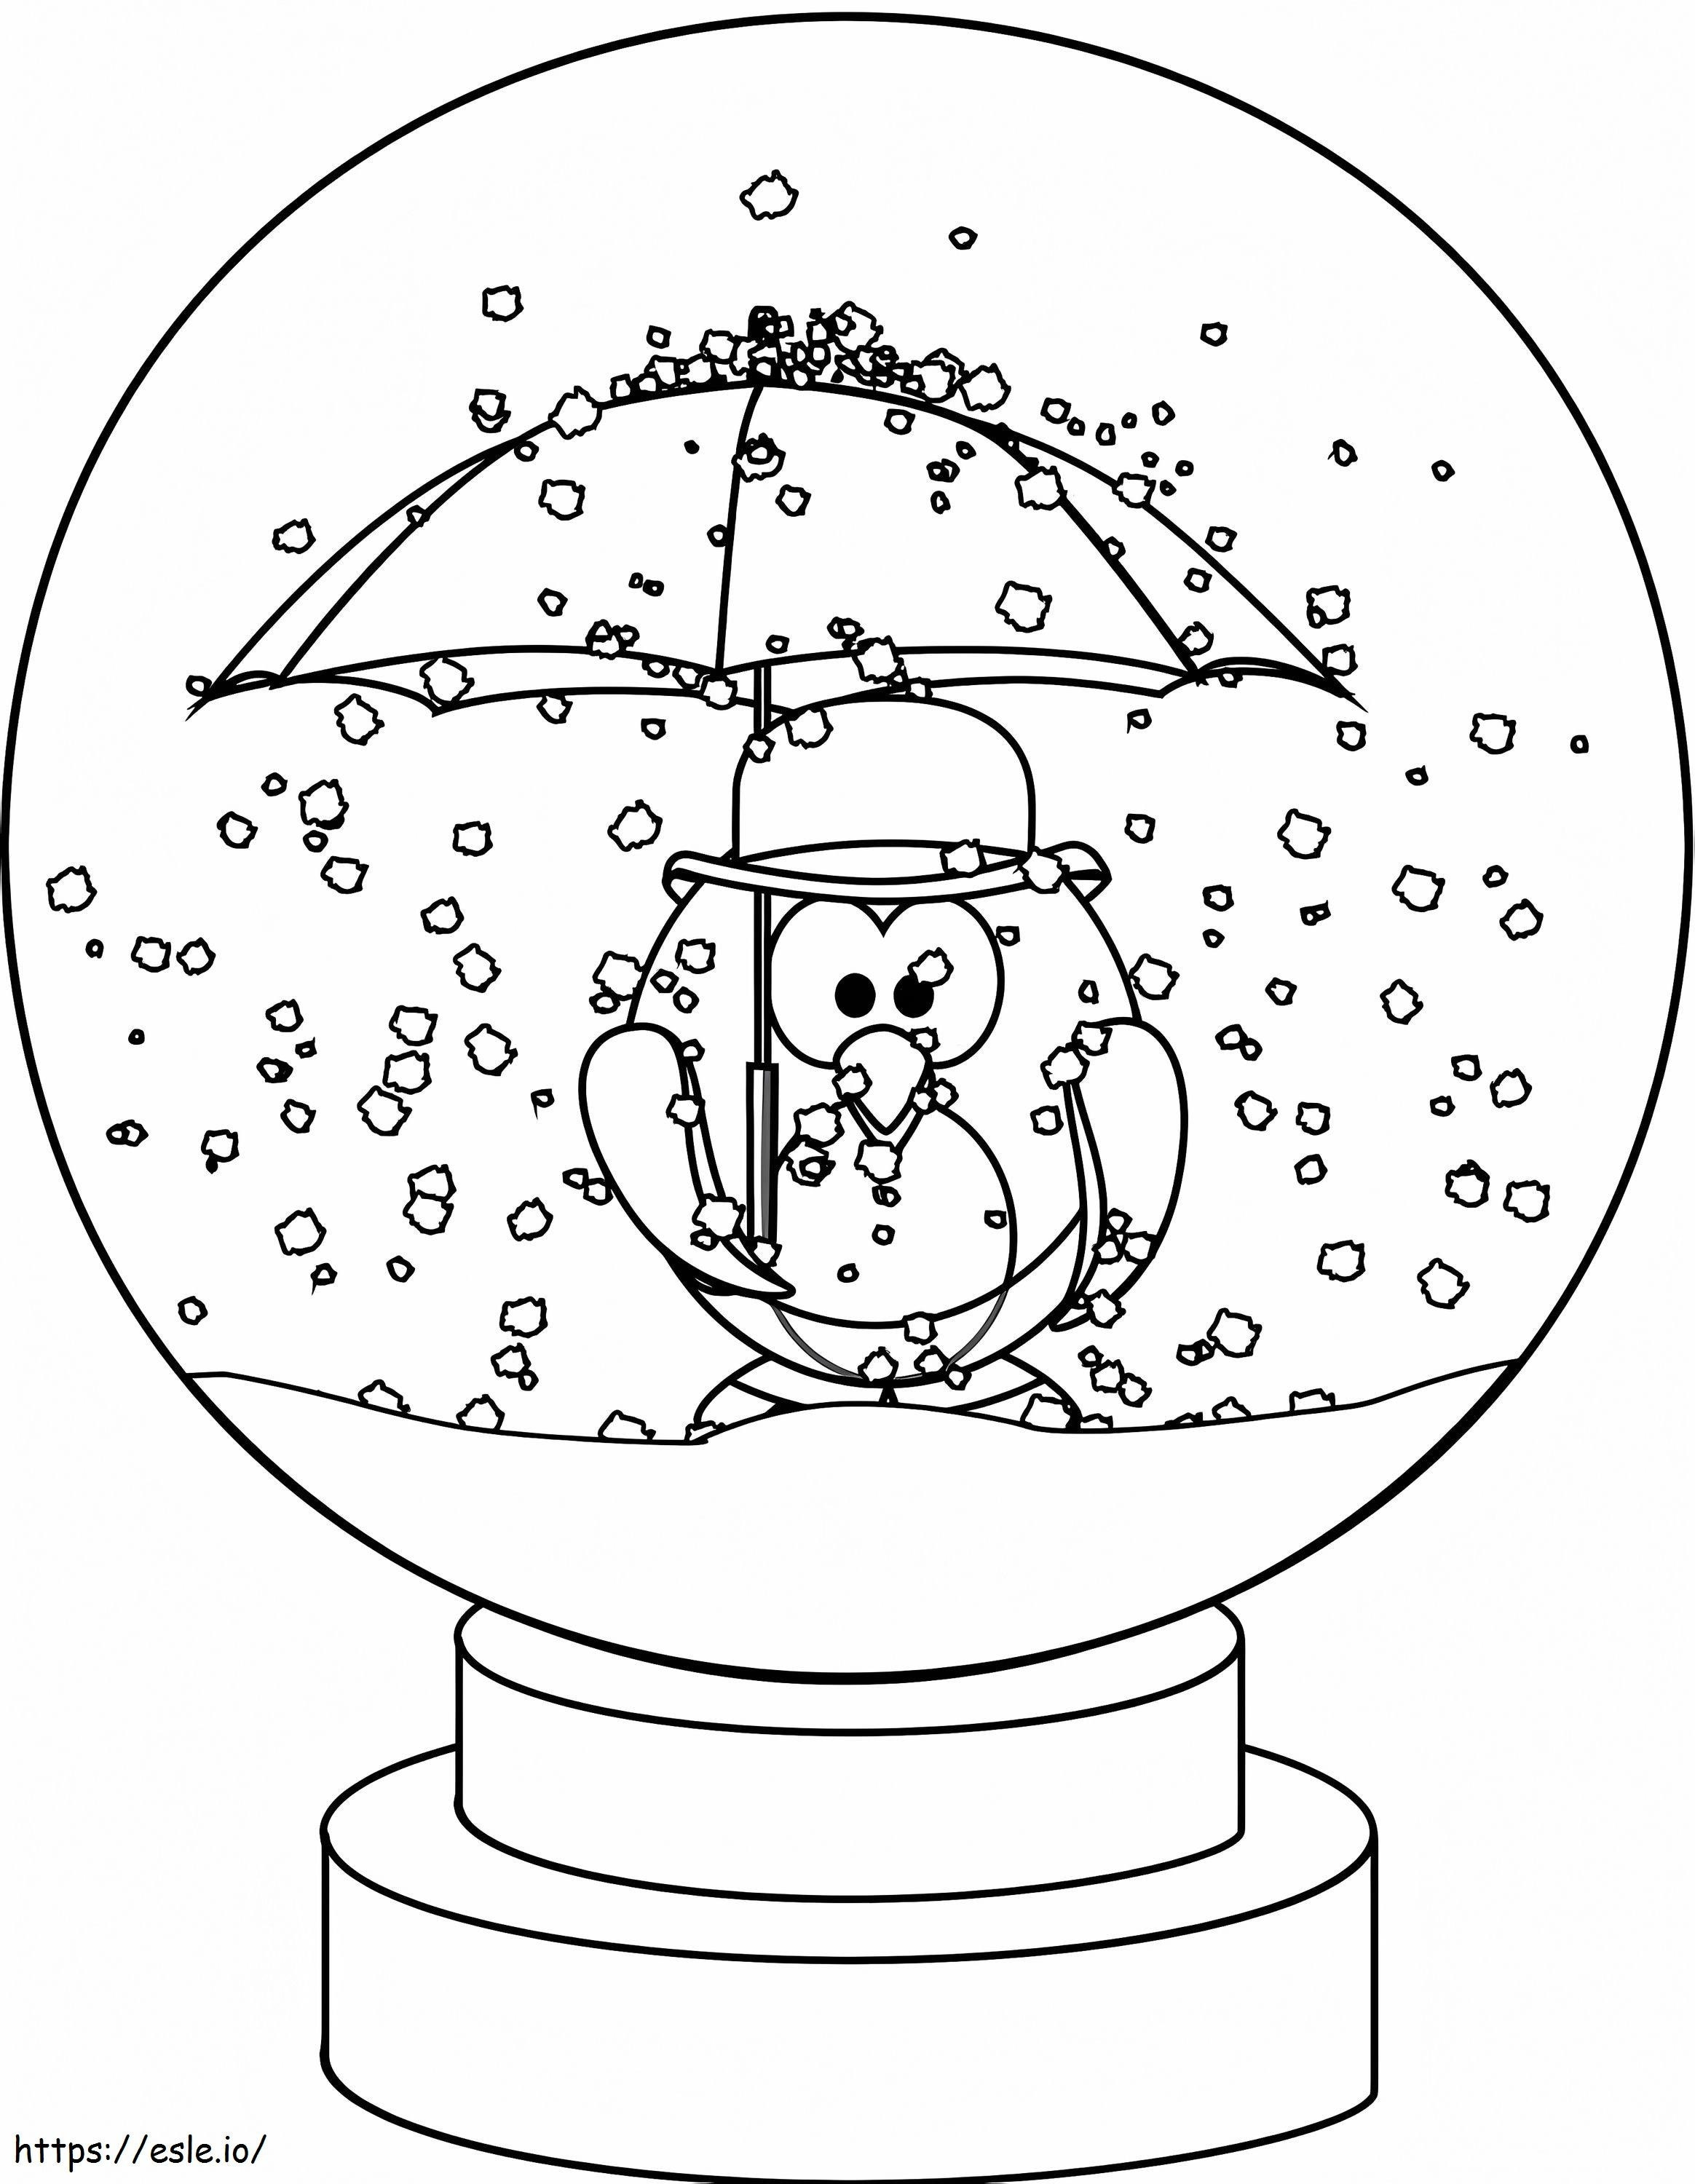 Cute Penguin In Snow Globe coloring page